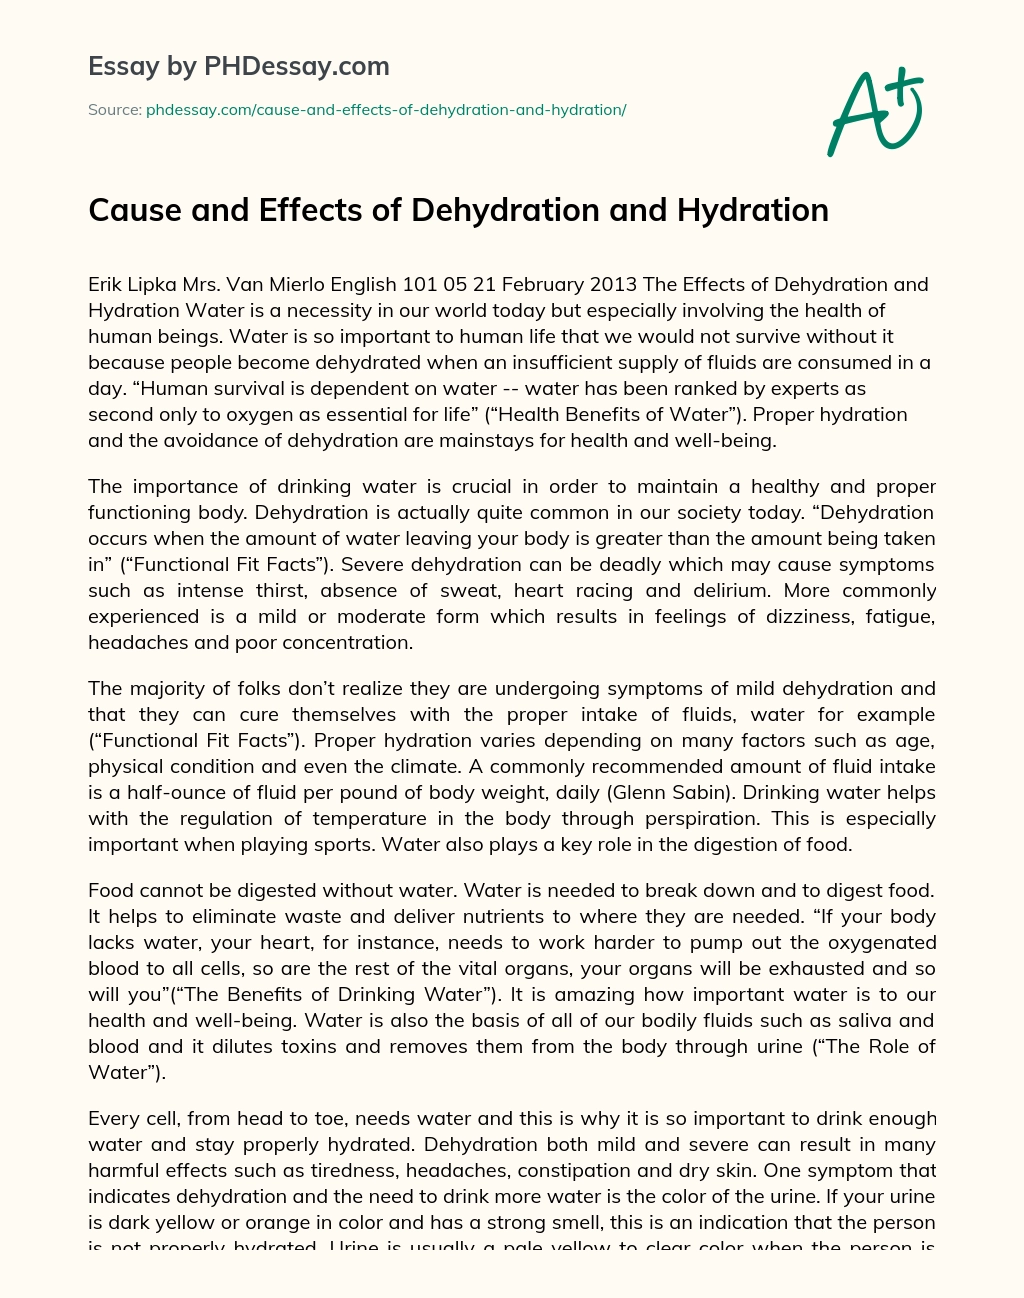 Cause and Effects of Dehydration and Hydration essay